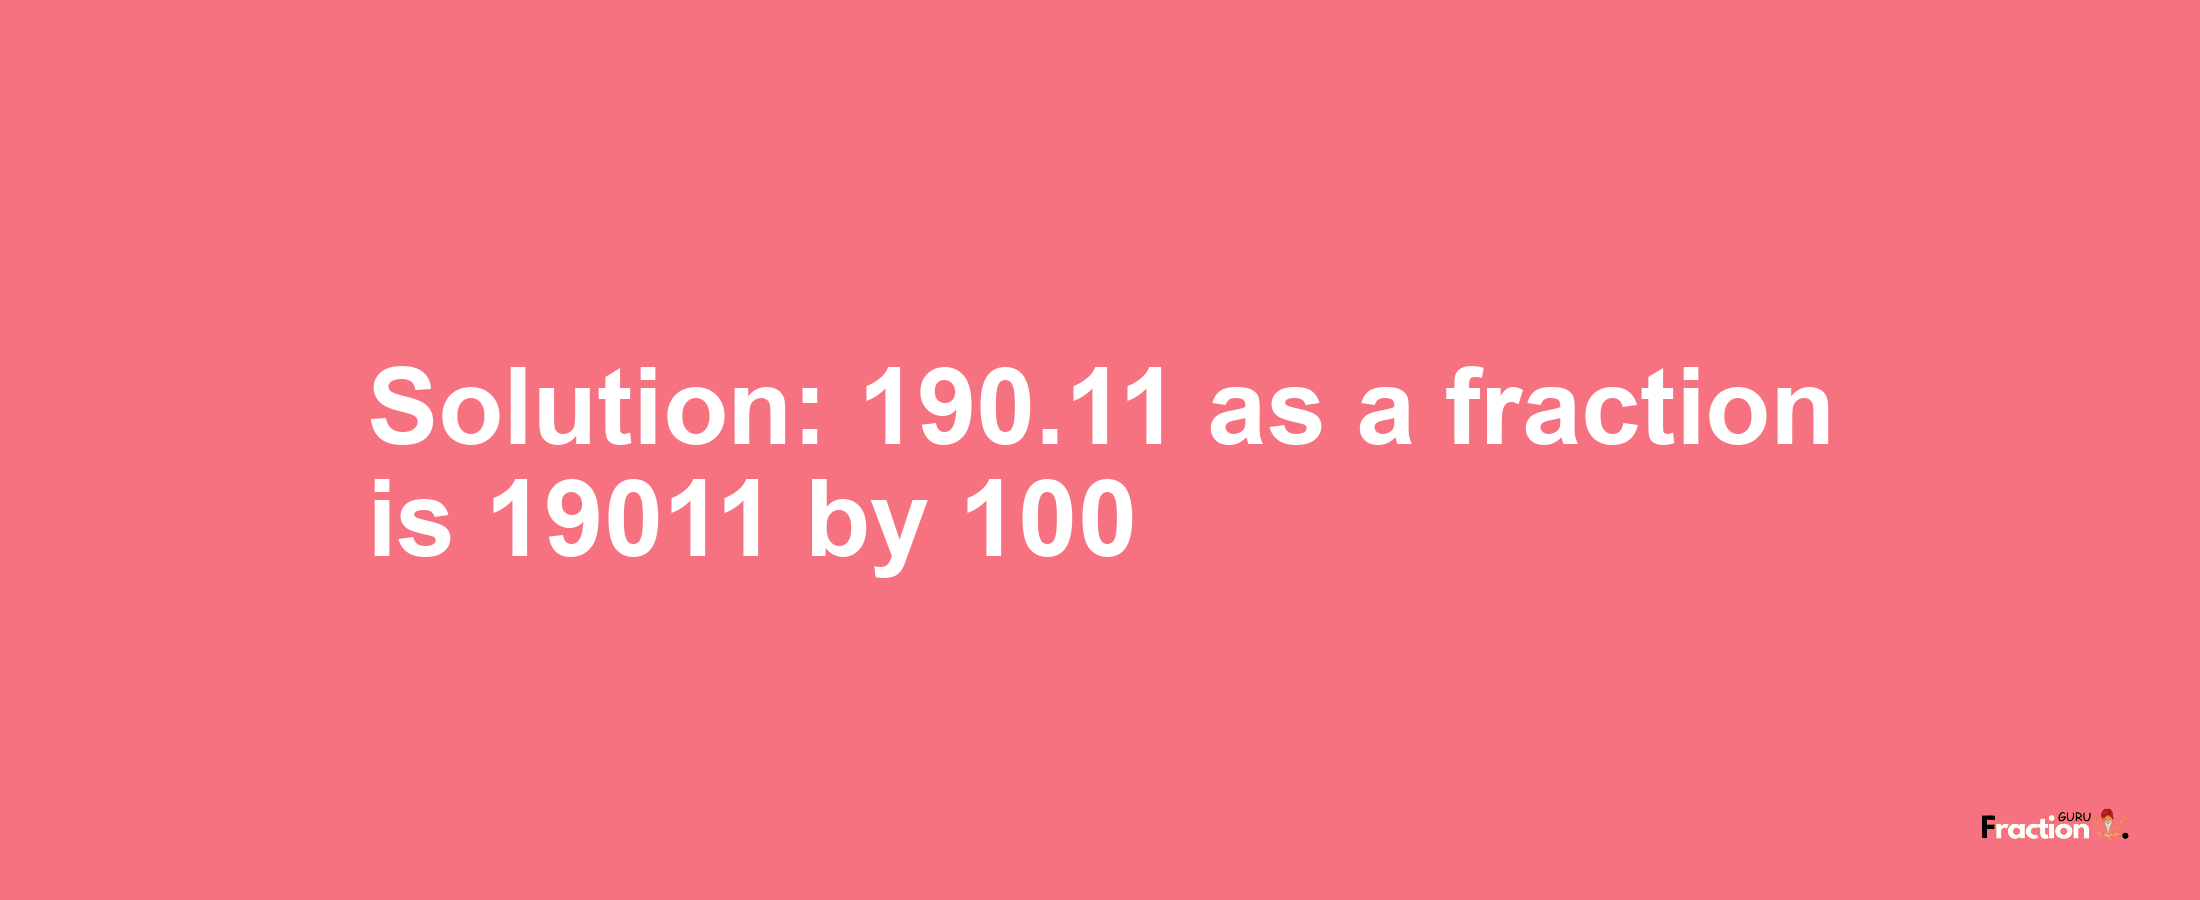 Solution:190.11 as a fraction is 19011/100